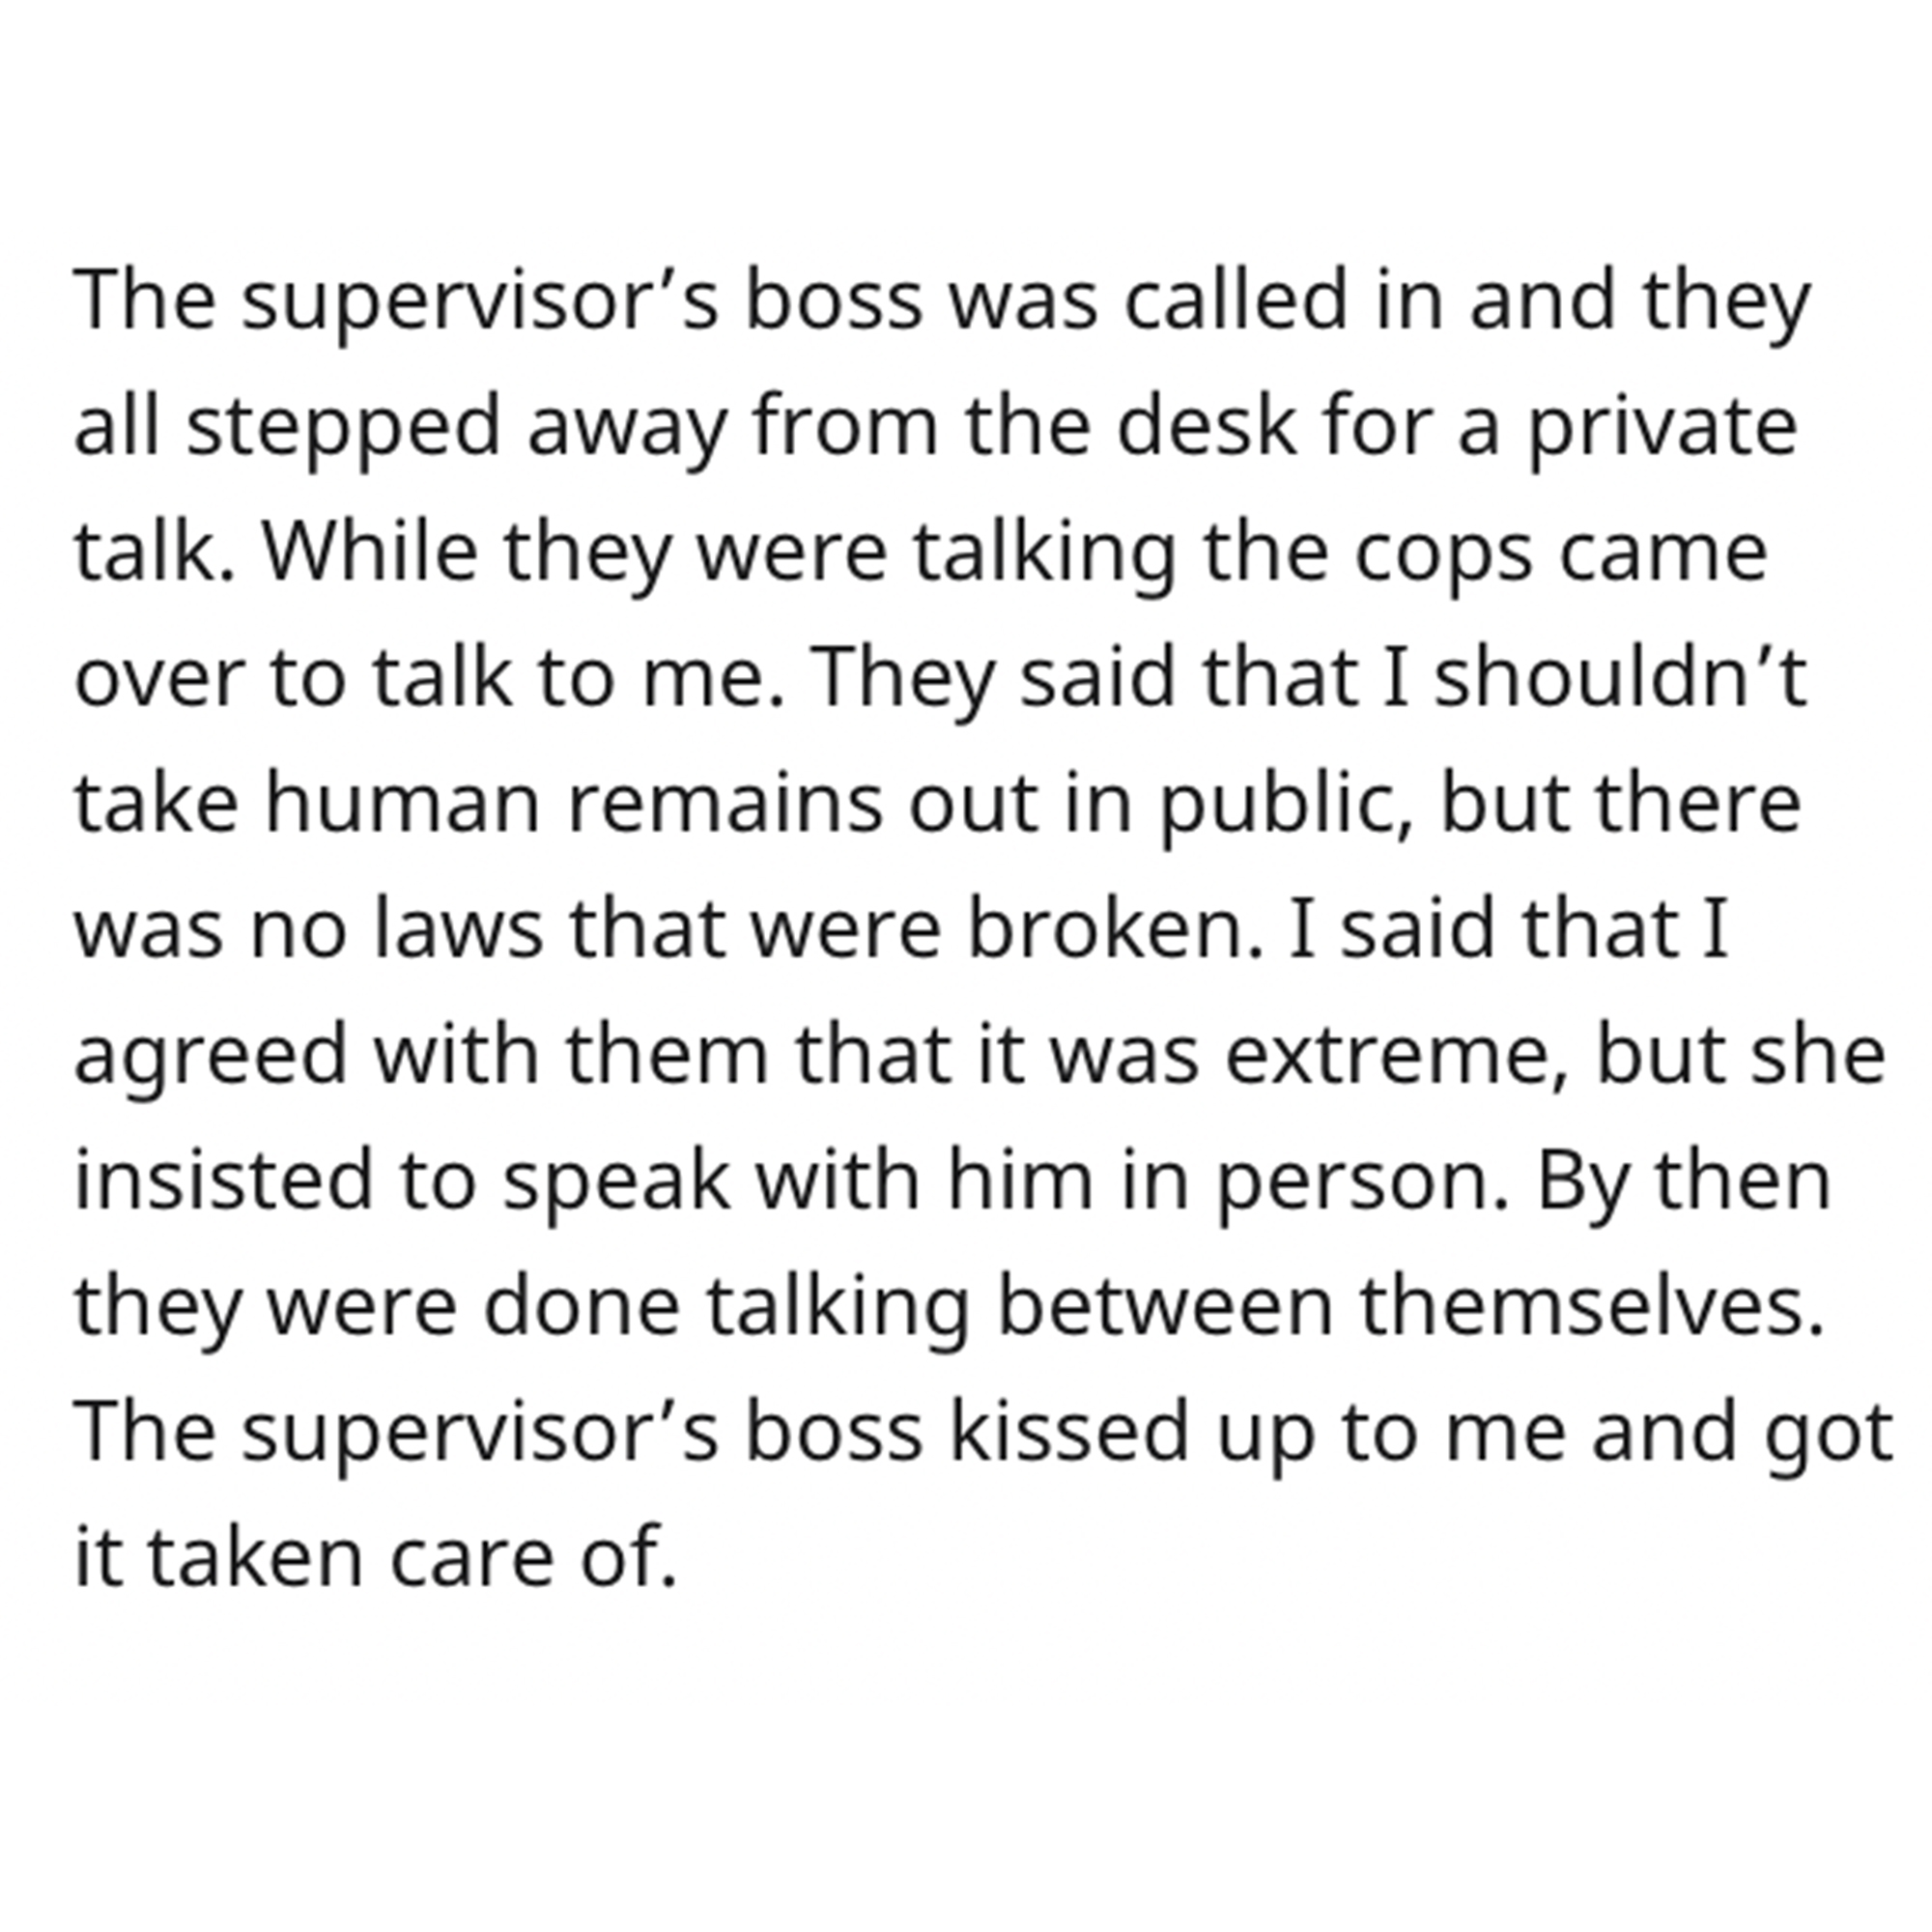 Dead Dad revenge story - taylor swift secret sessions - The supervisor's boss was called in and they all stepped away from the desk for a private talk. While they were talking the cops came over to talk to me. They said that I shouldn't take human remains